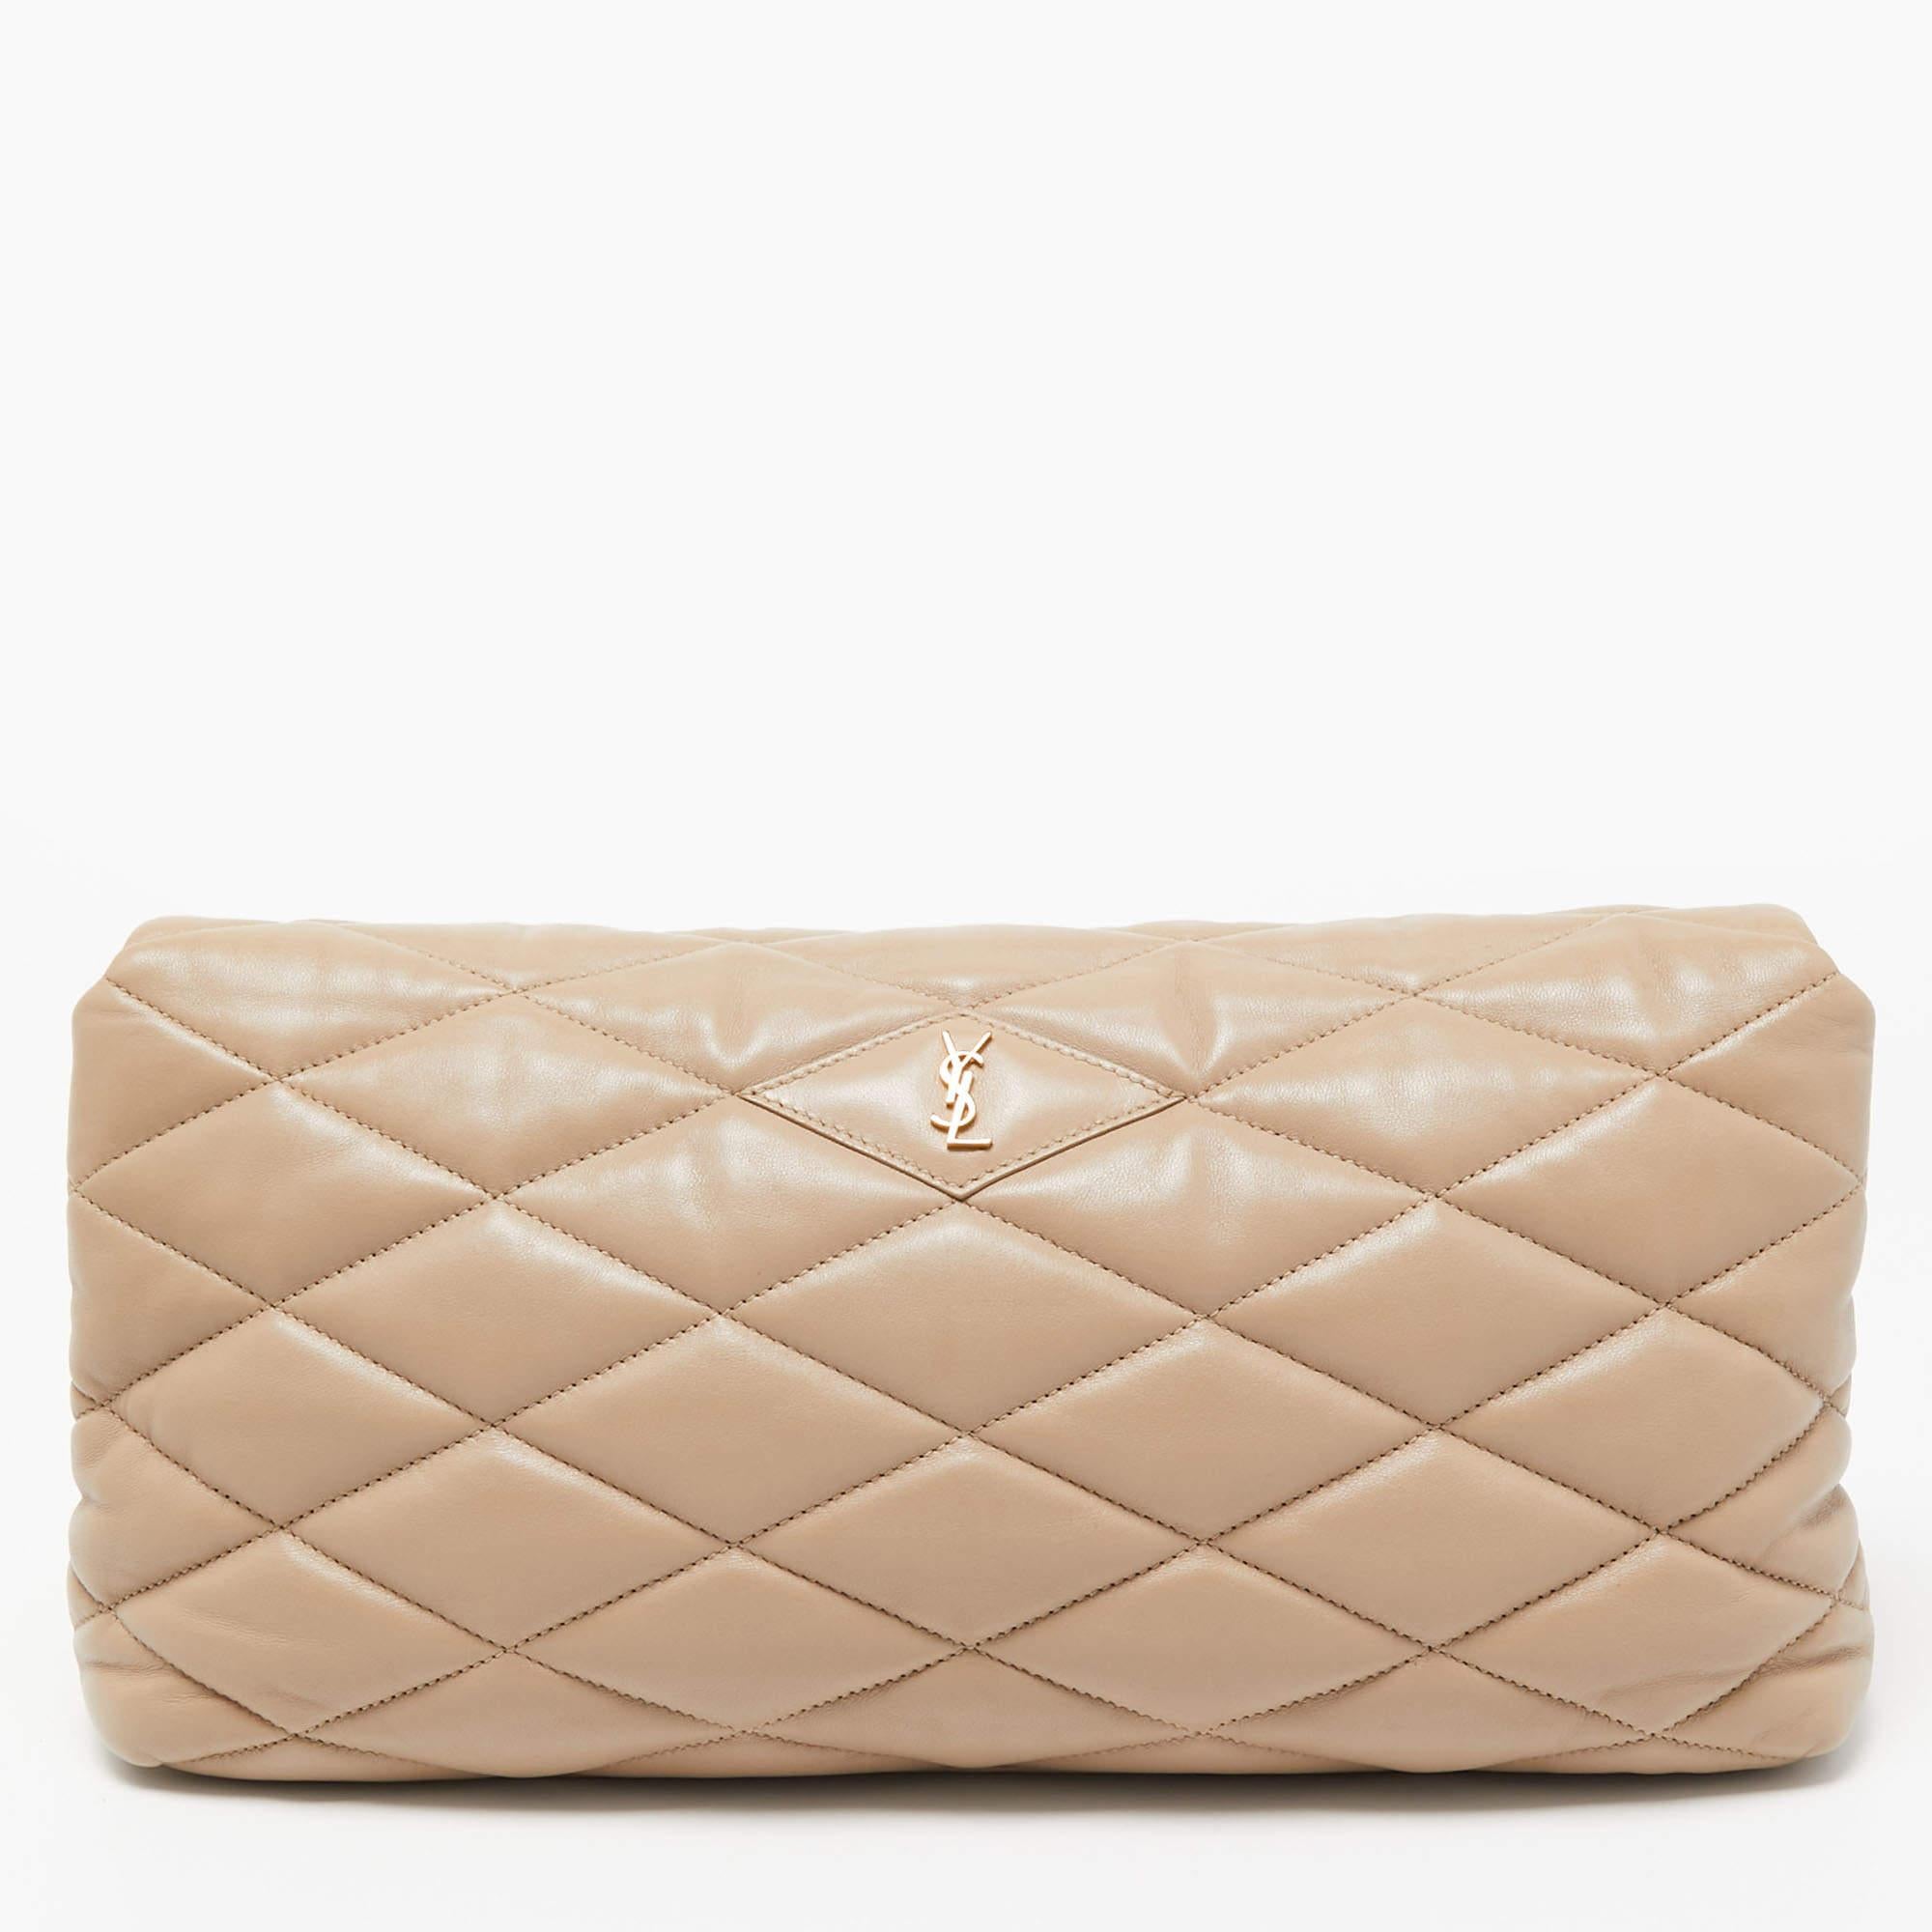 Just right for conveniently storing your valuables without weighing your look down, this Saint Laurent clutch features a puffer leather exterior with gold-tone metal fittings. Carry it in hand as a stylish evening accessory.

Includes: Original